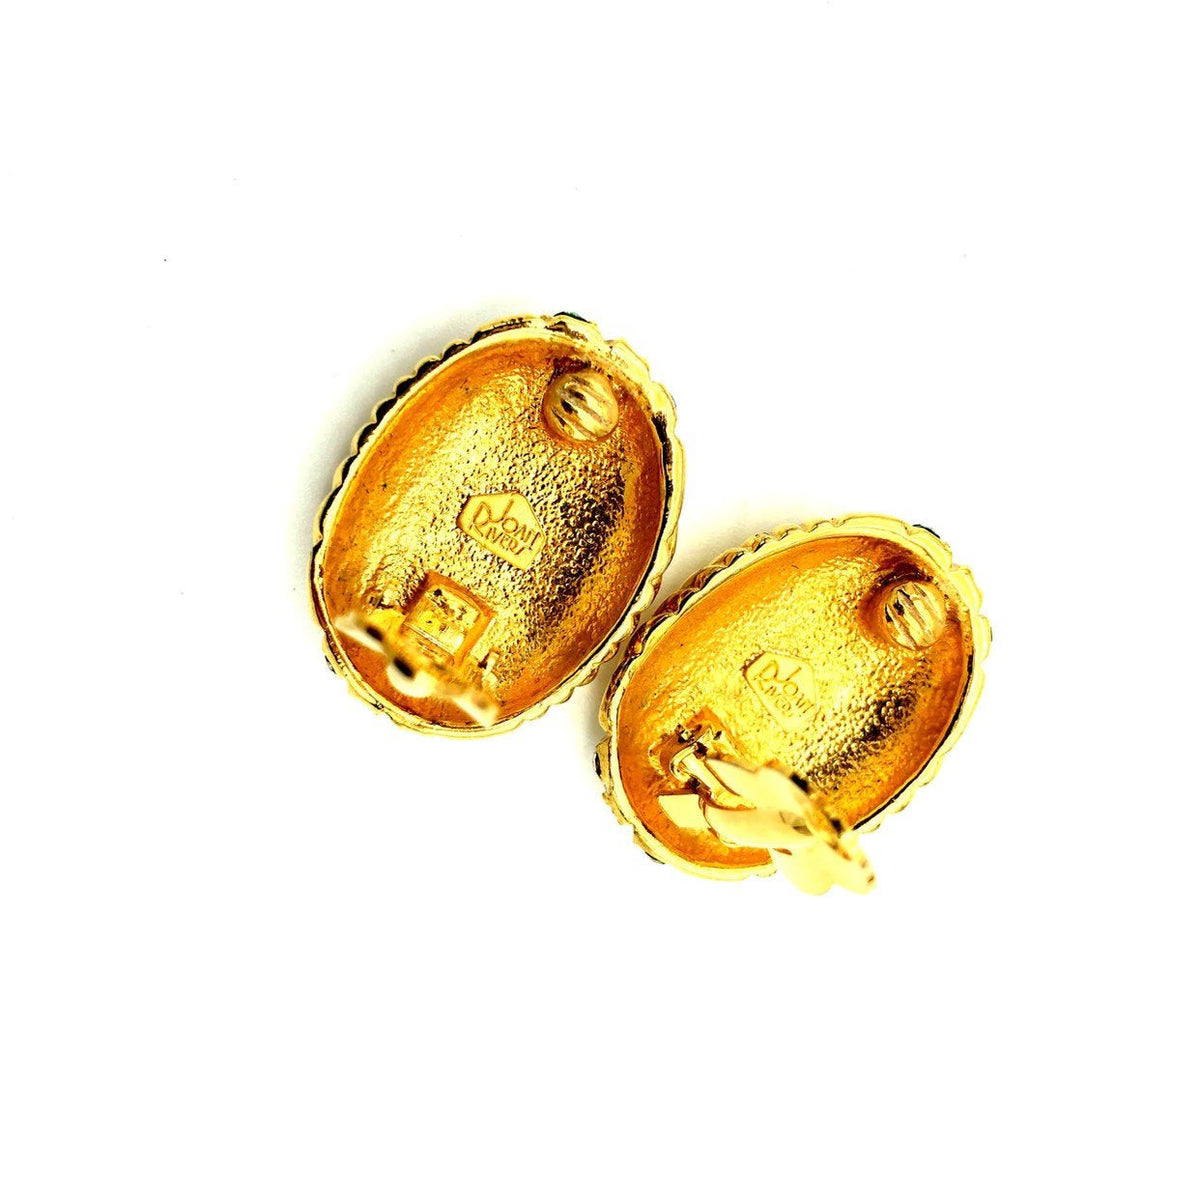 Classic Joan Rivers Gold & Rhinestone Vintage Clip-On Earrings - 24 Wishes Vintage Jewelry